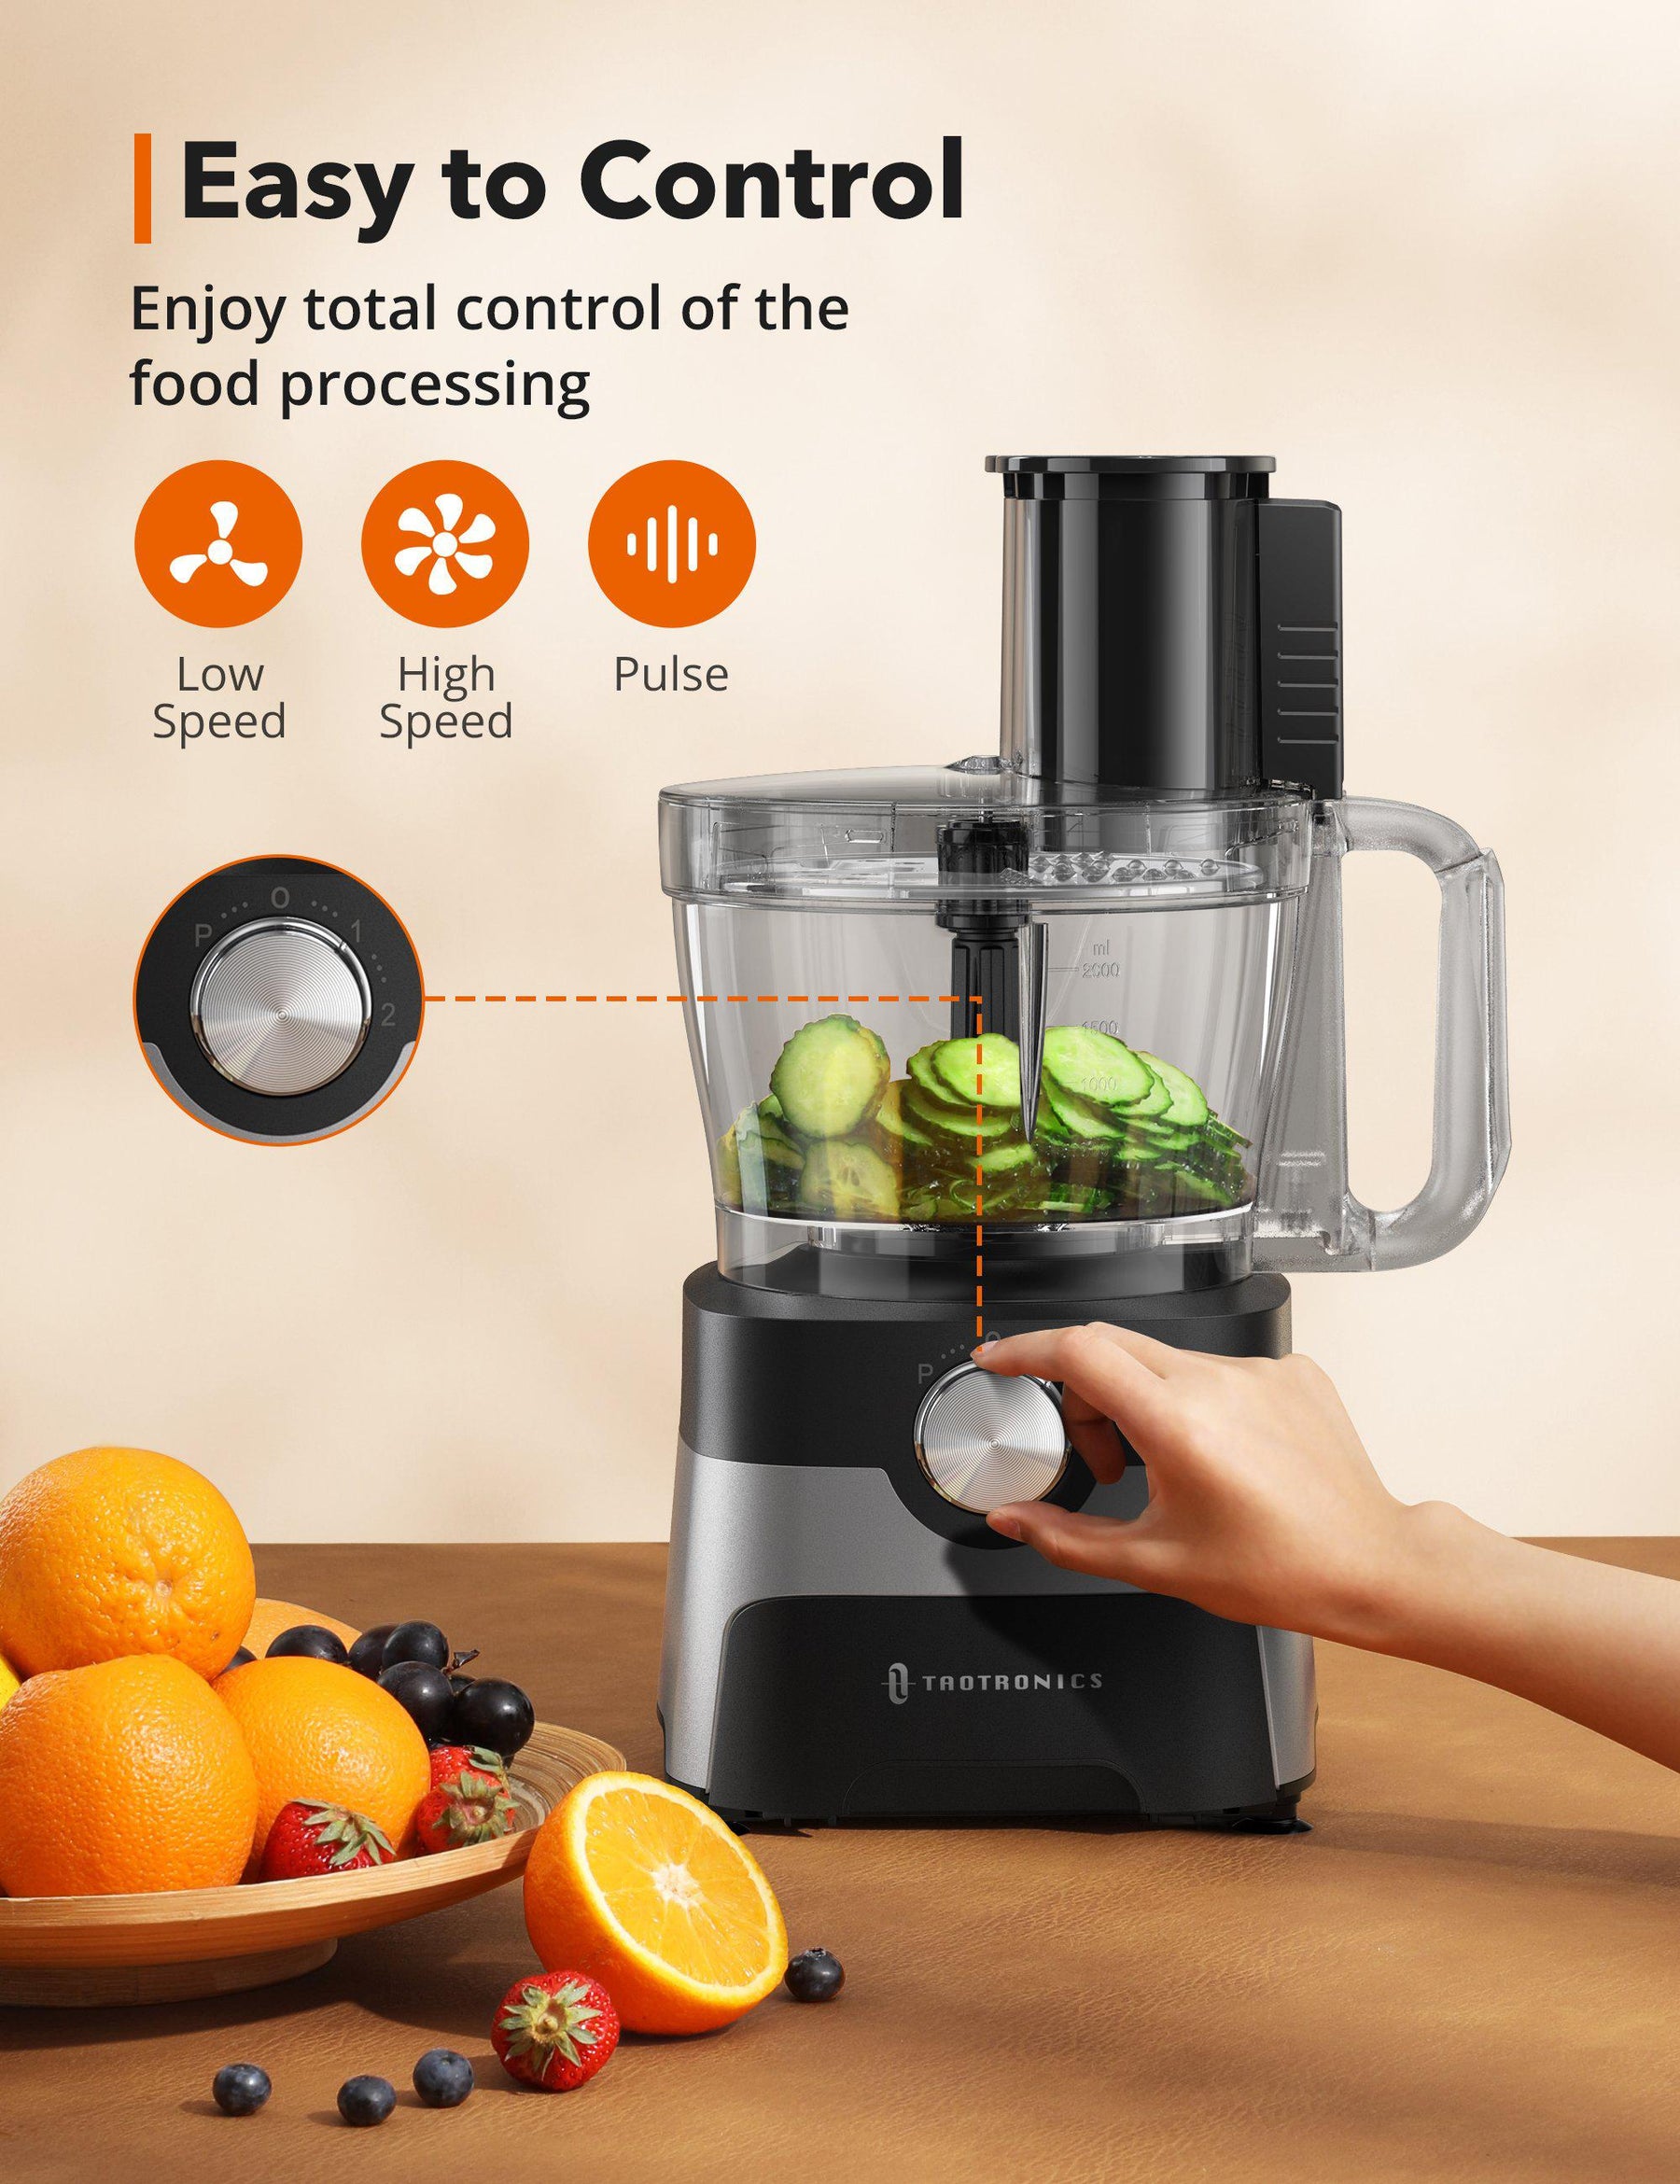 3-in-1 Blender & Food Processor Combo: Make Delicious Shakes